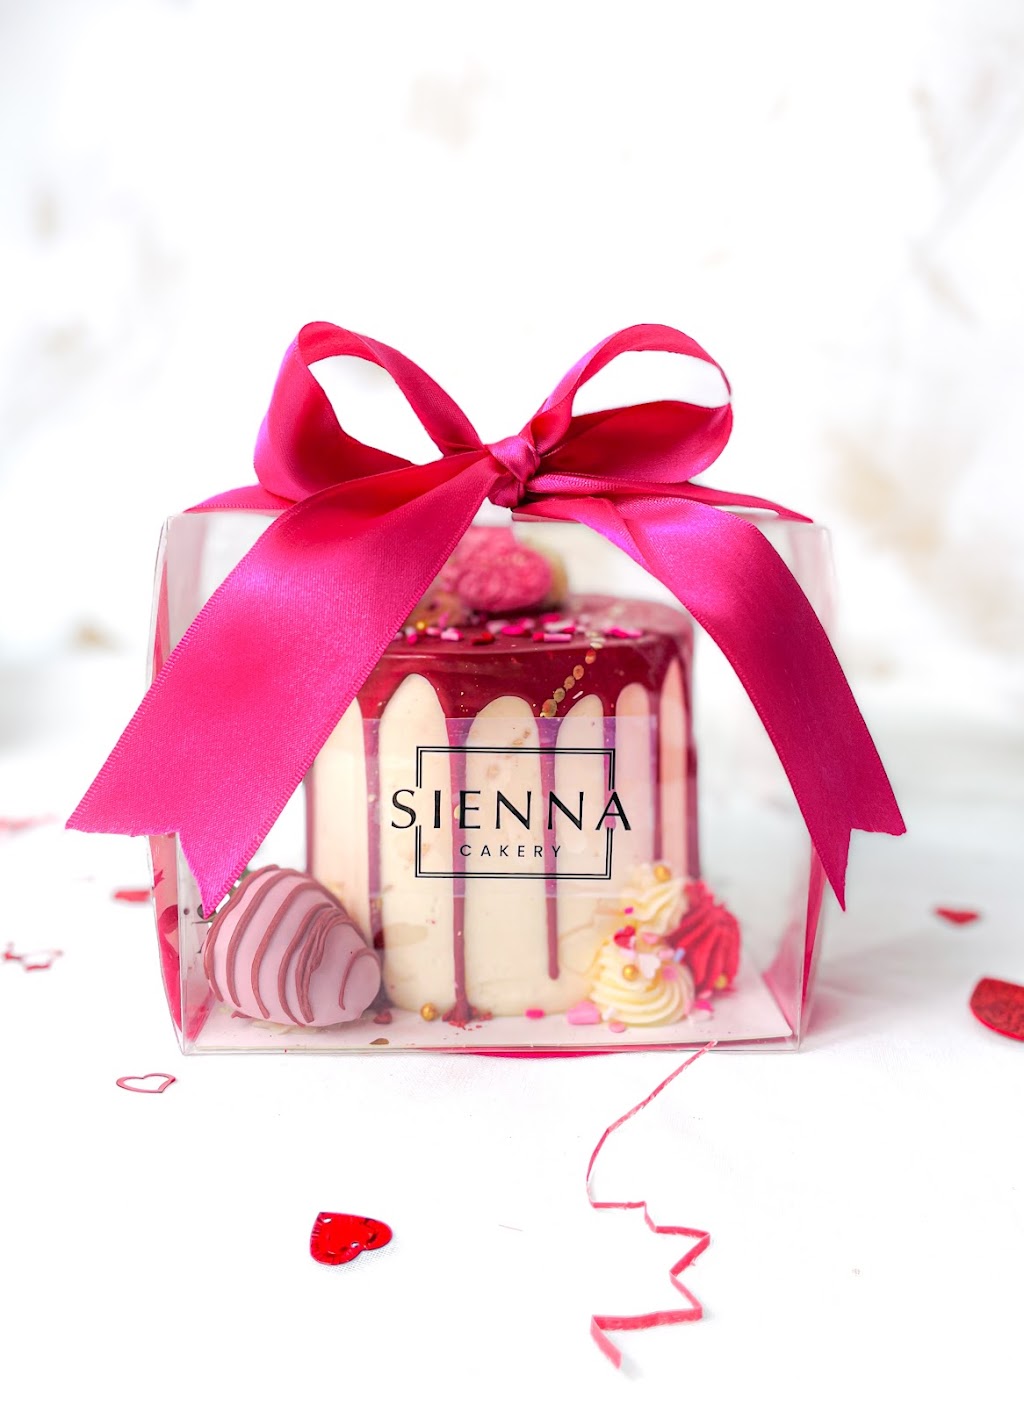 Sienna Cakery | 109 Florence St, West Hartford, CT 06110 | Phone: (860) 264-6201